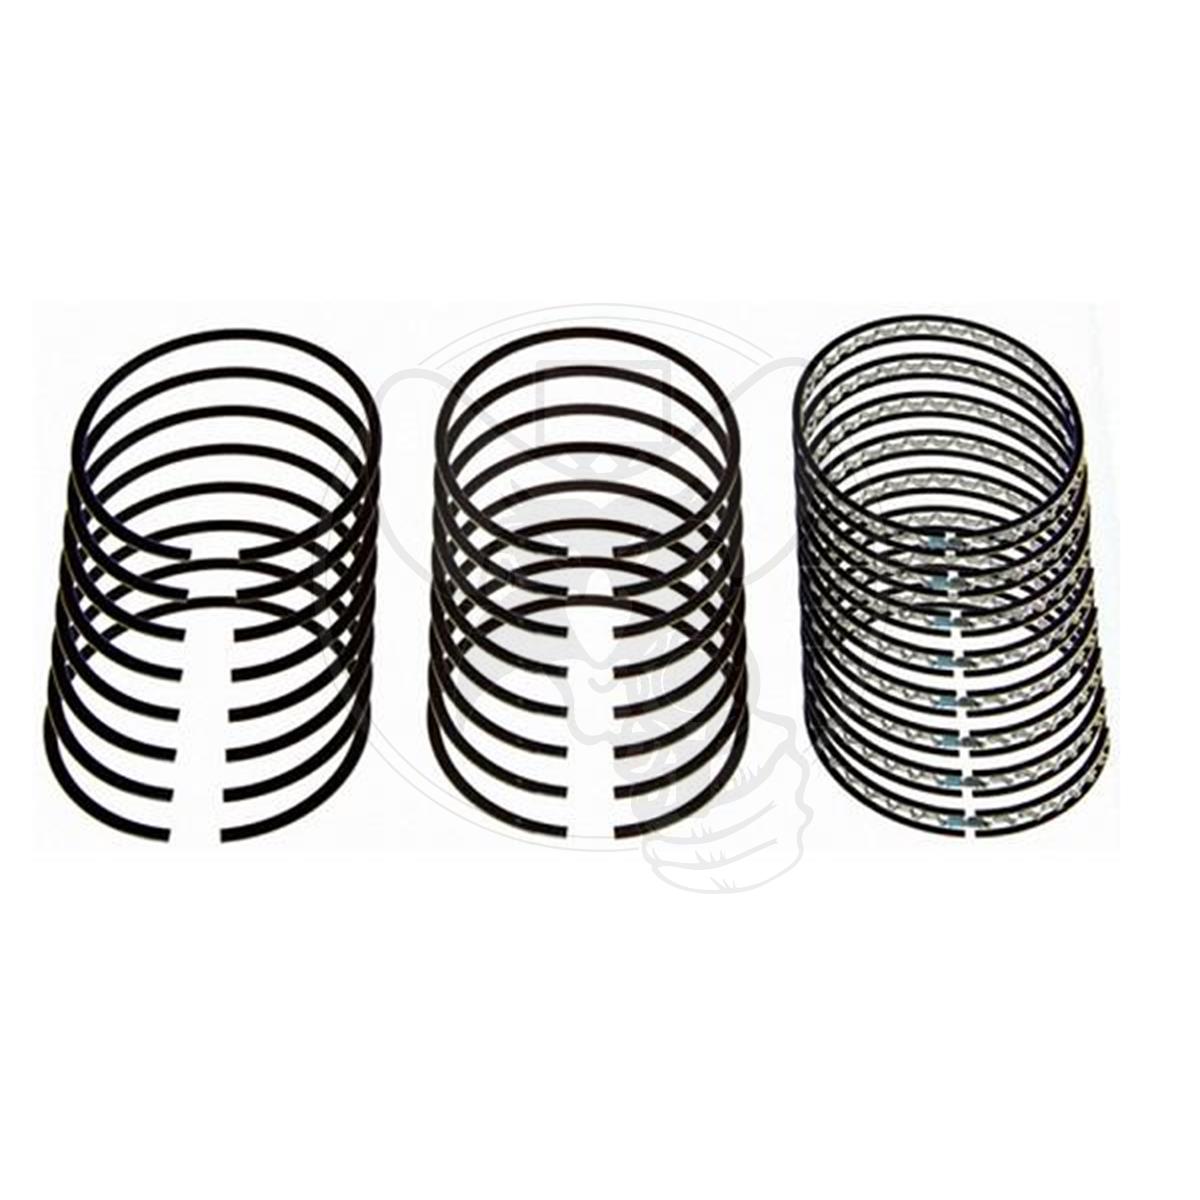 SPEED PRO 4.000" PISTON RING SET 5/64" 5/64" 3/16" THICK 8CYL CAST